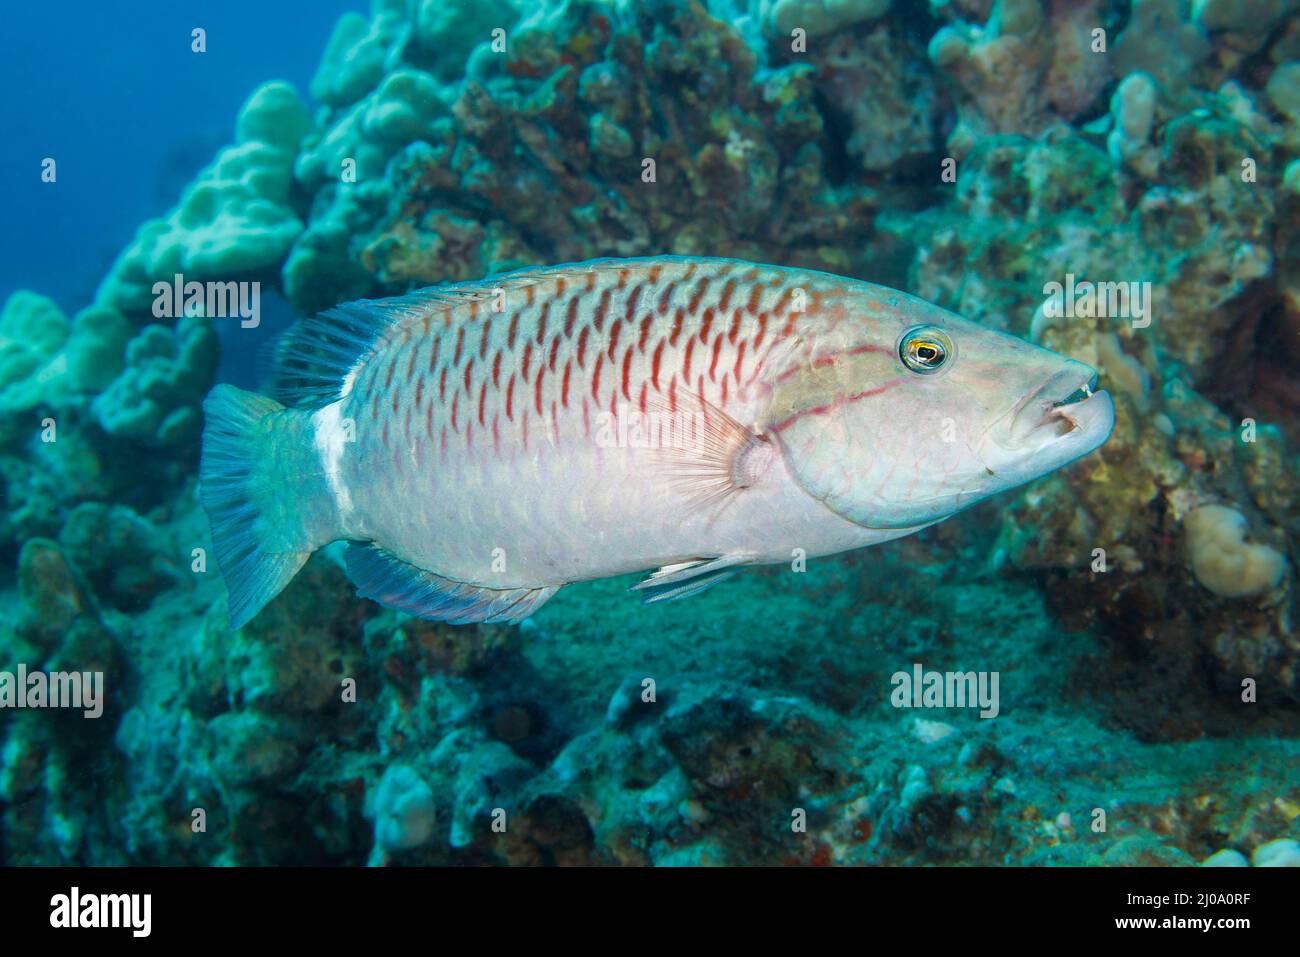 Ringtail wrasse, Oxycheilinus unifasciatus, reach 18 inches in length and feed on other fish, crabs, brittle stars and sea urchins.  Hawaii. Stock Photo